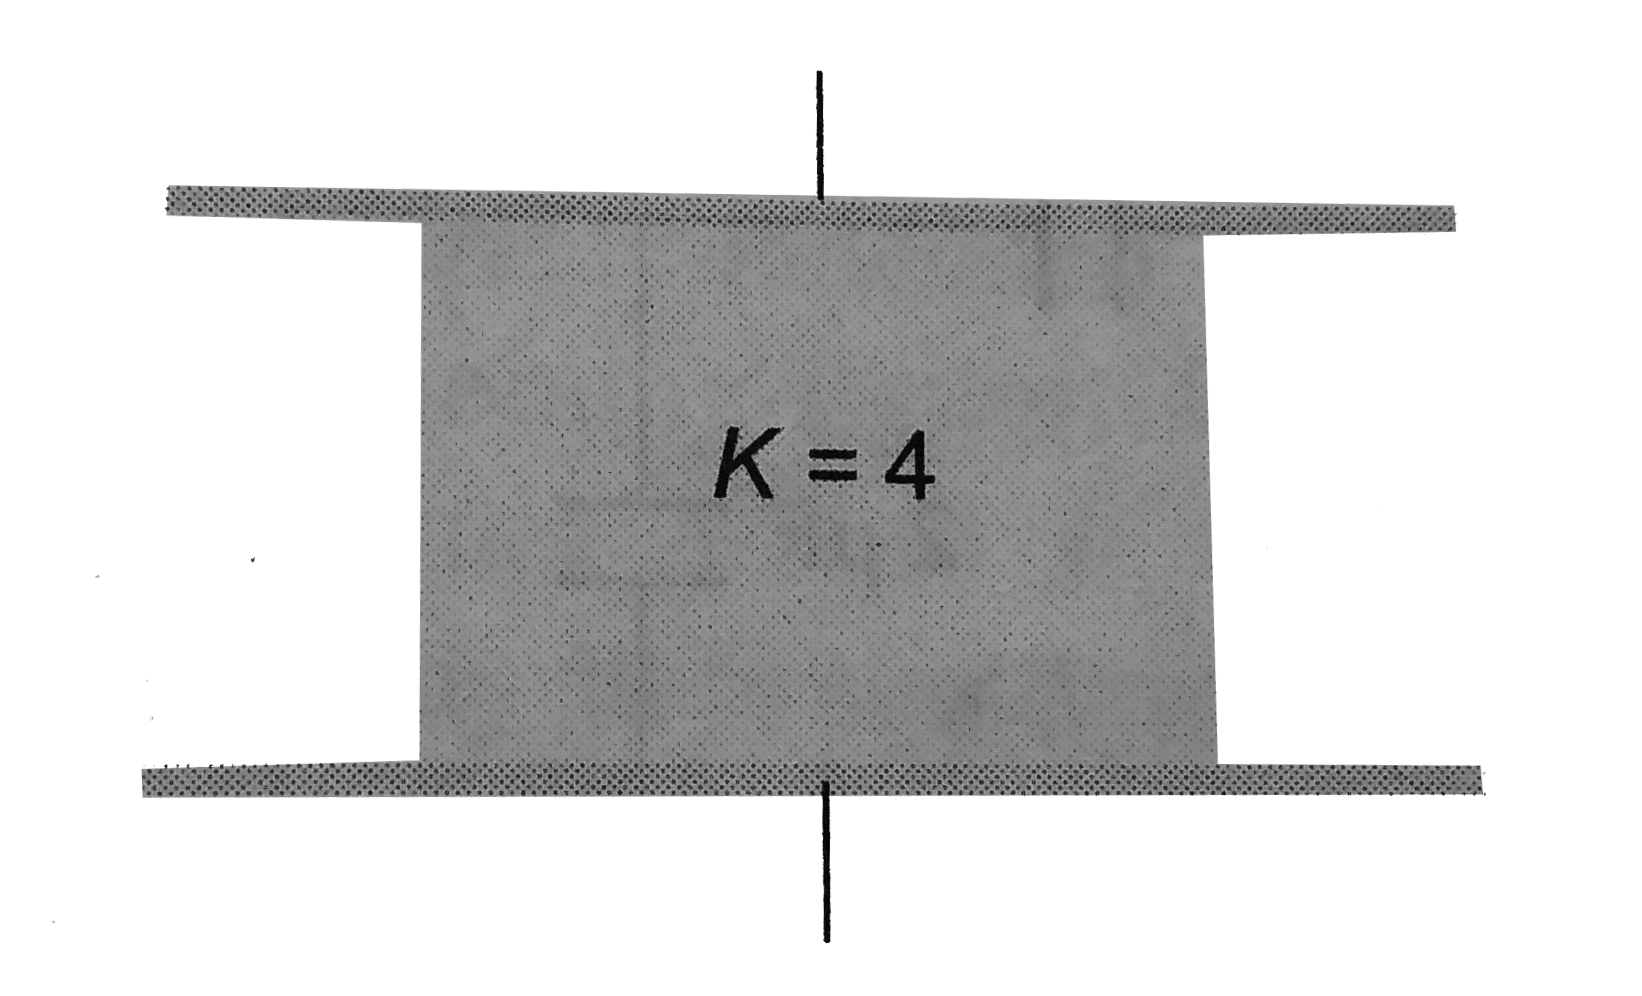 Consider a parallel plate capacitor of 10 muF (micro-farad) with air filled in the gap between the plates. Now one half of the space between the plates is filled with a dielectric of dielectric constant 4, as shown in the figure. The capacity of the capacitor charges to